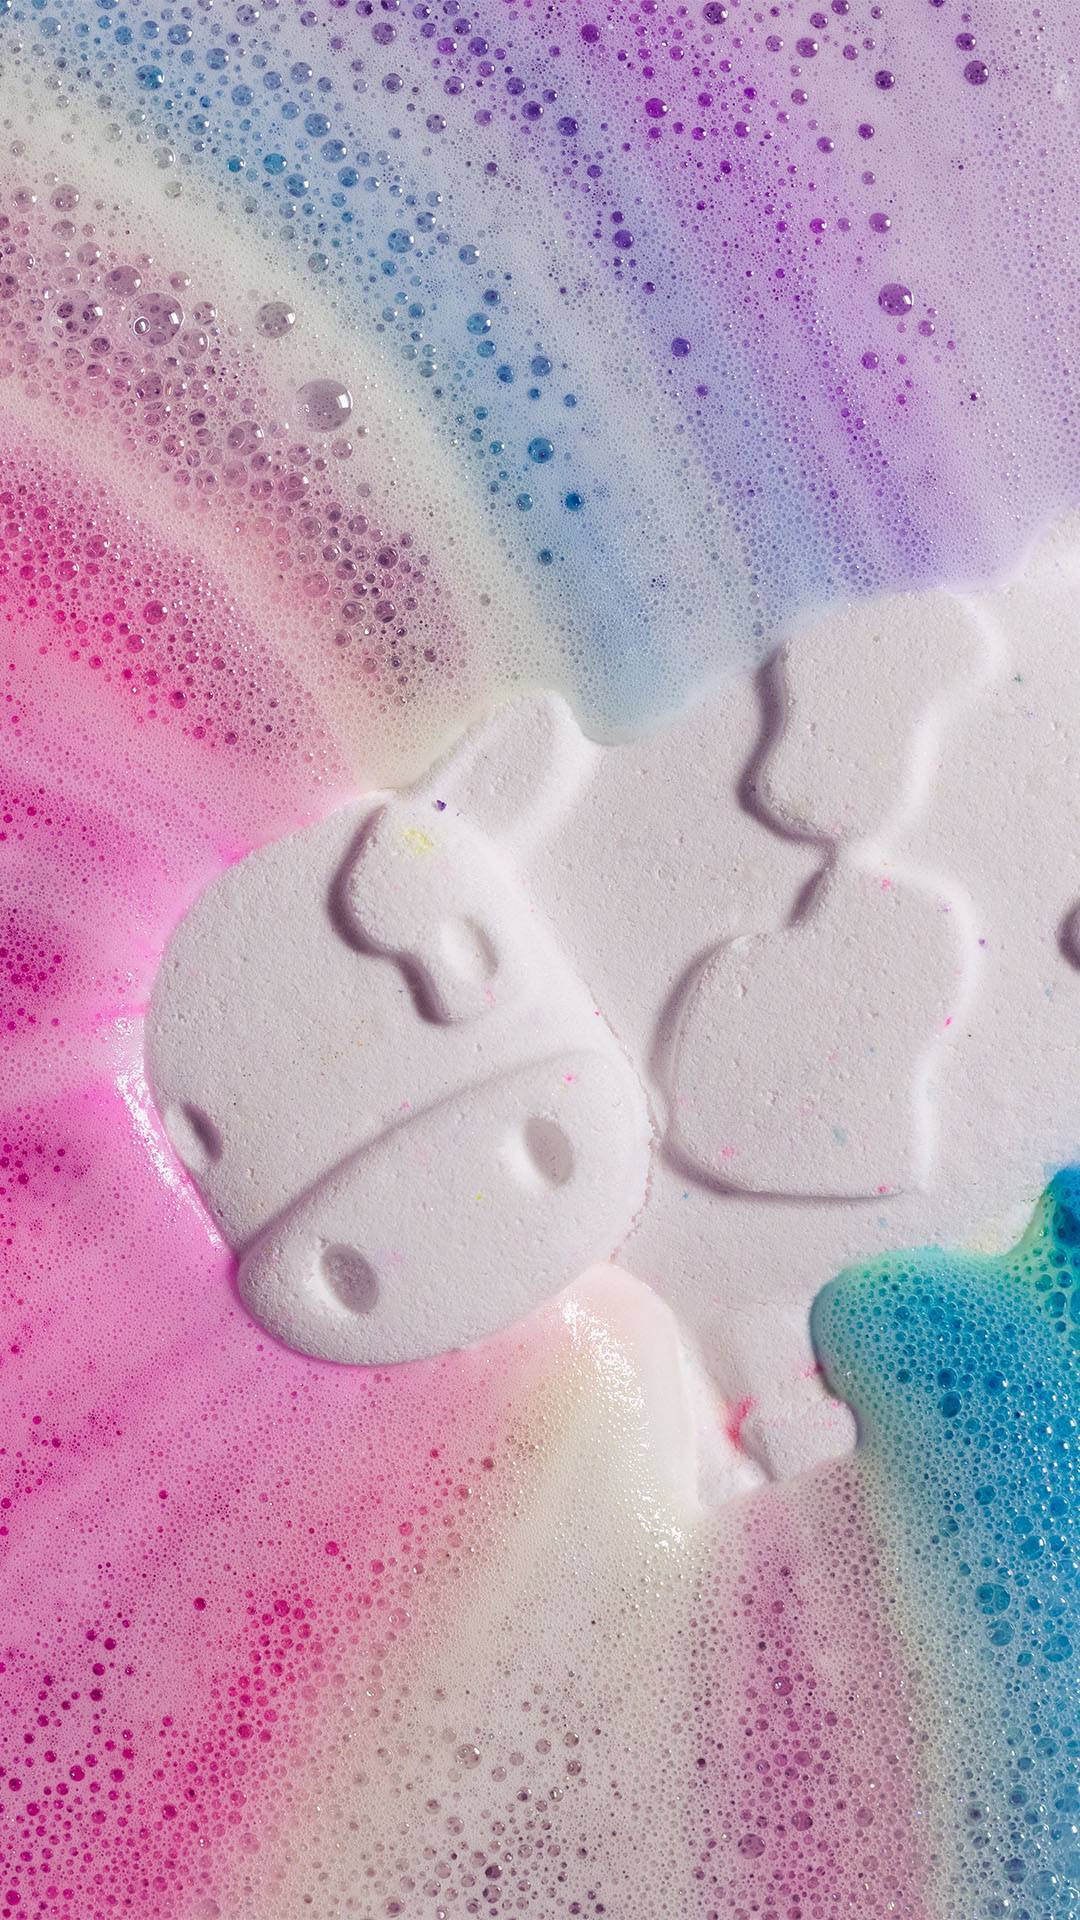 Toby's Magic Cow, a white cow-shaped bath bomb, lies back in a foamy rainbow-coloured water of its own fizzing creation.